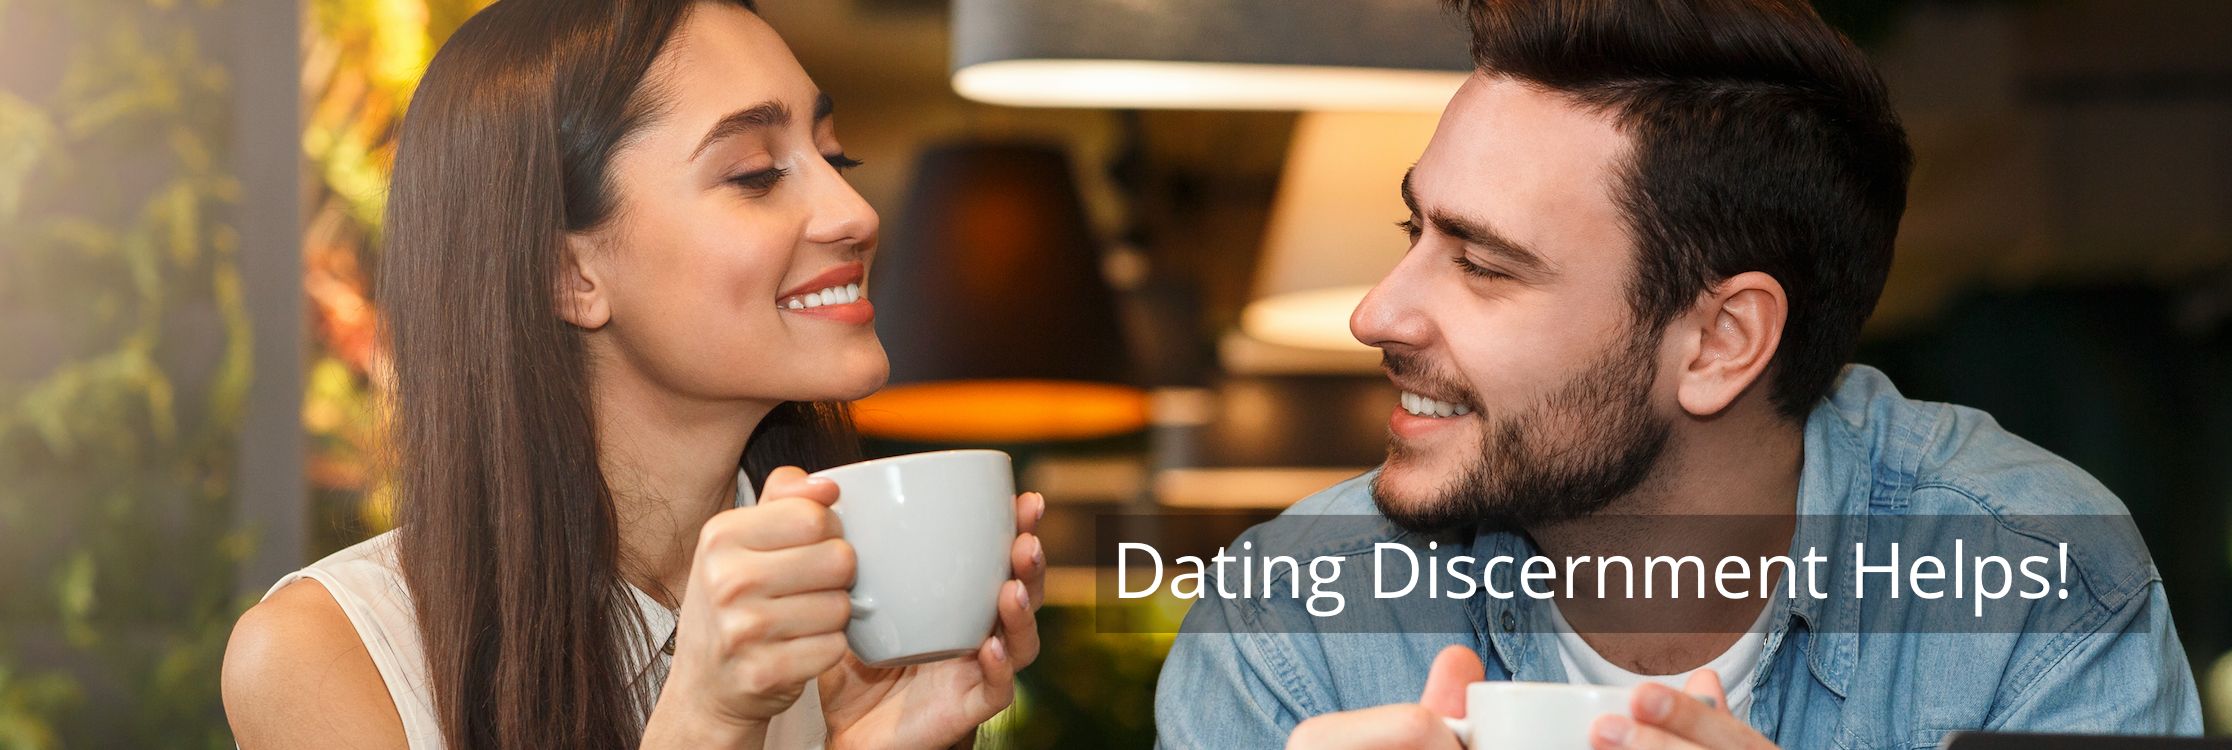 Dating discernment Banner